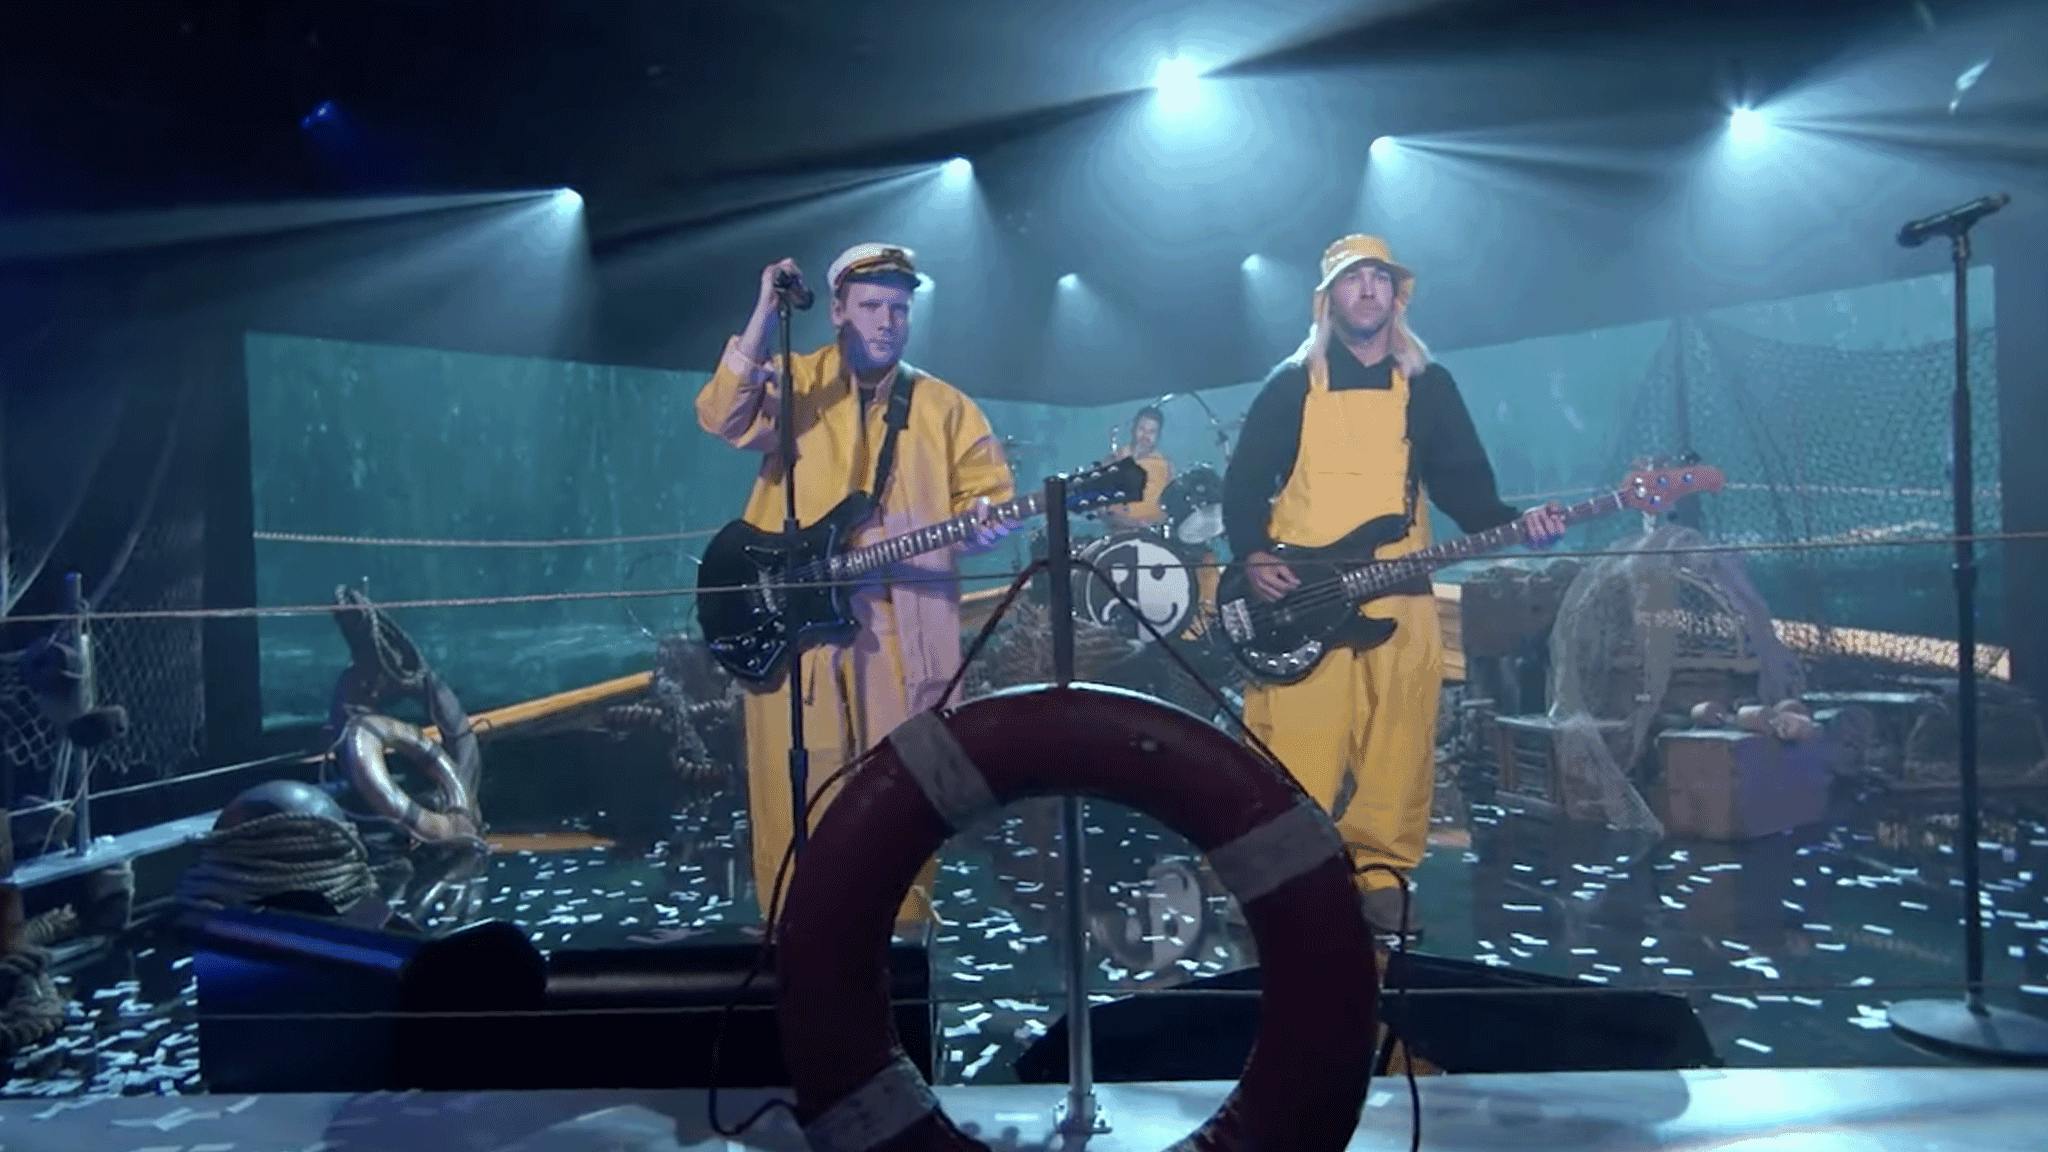 Watch Fall Out Boy’s nautical-themed performance on Jimmy Kimmel Live